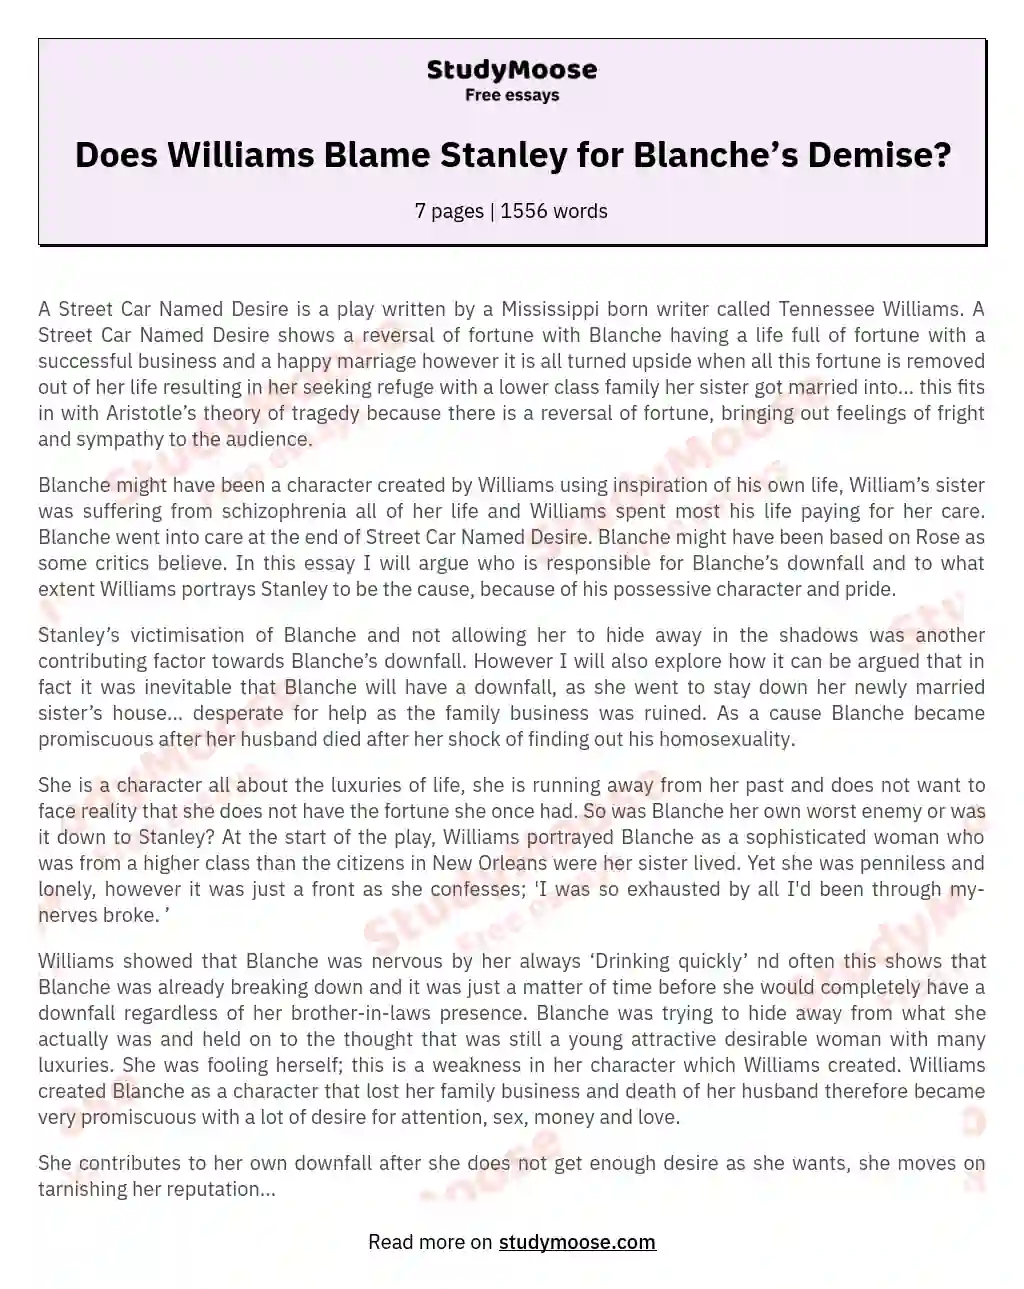 To What Extent Does Williams Portray Stanley as the Cause for Blanche’s Downfall?